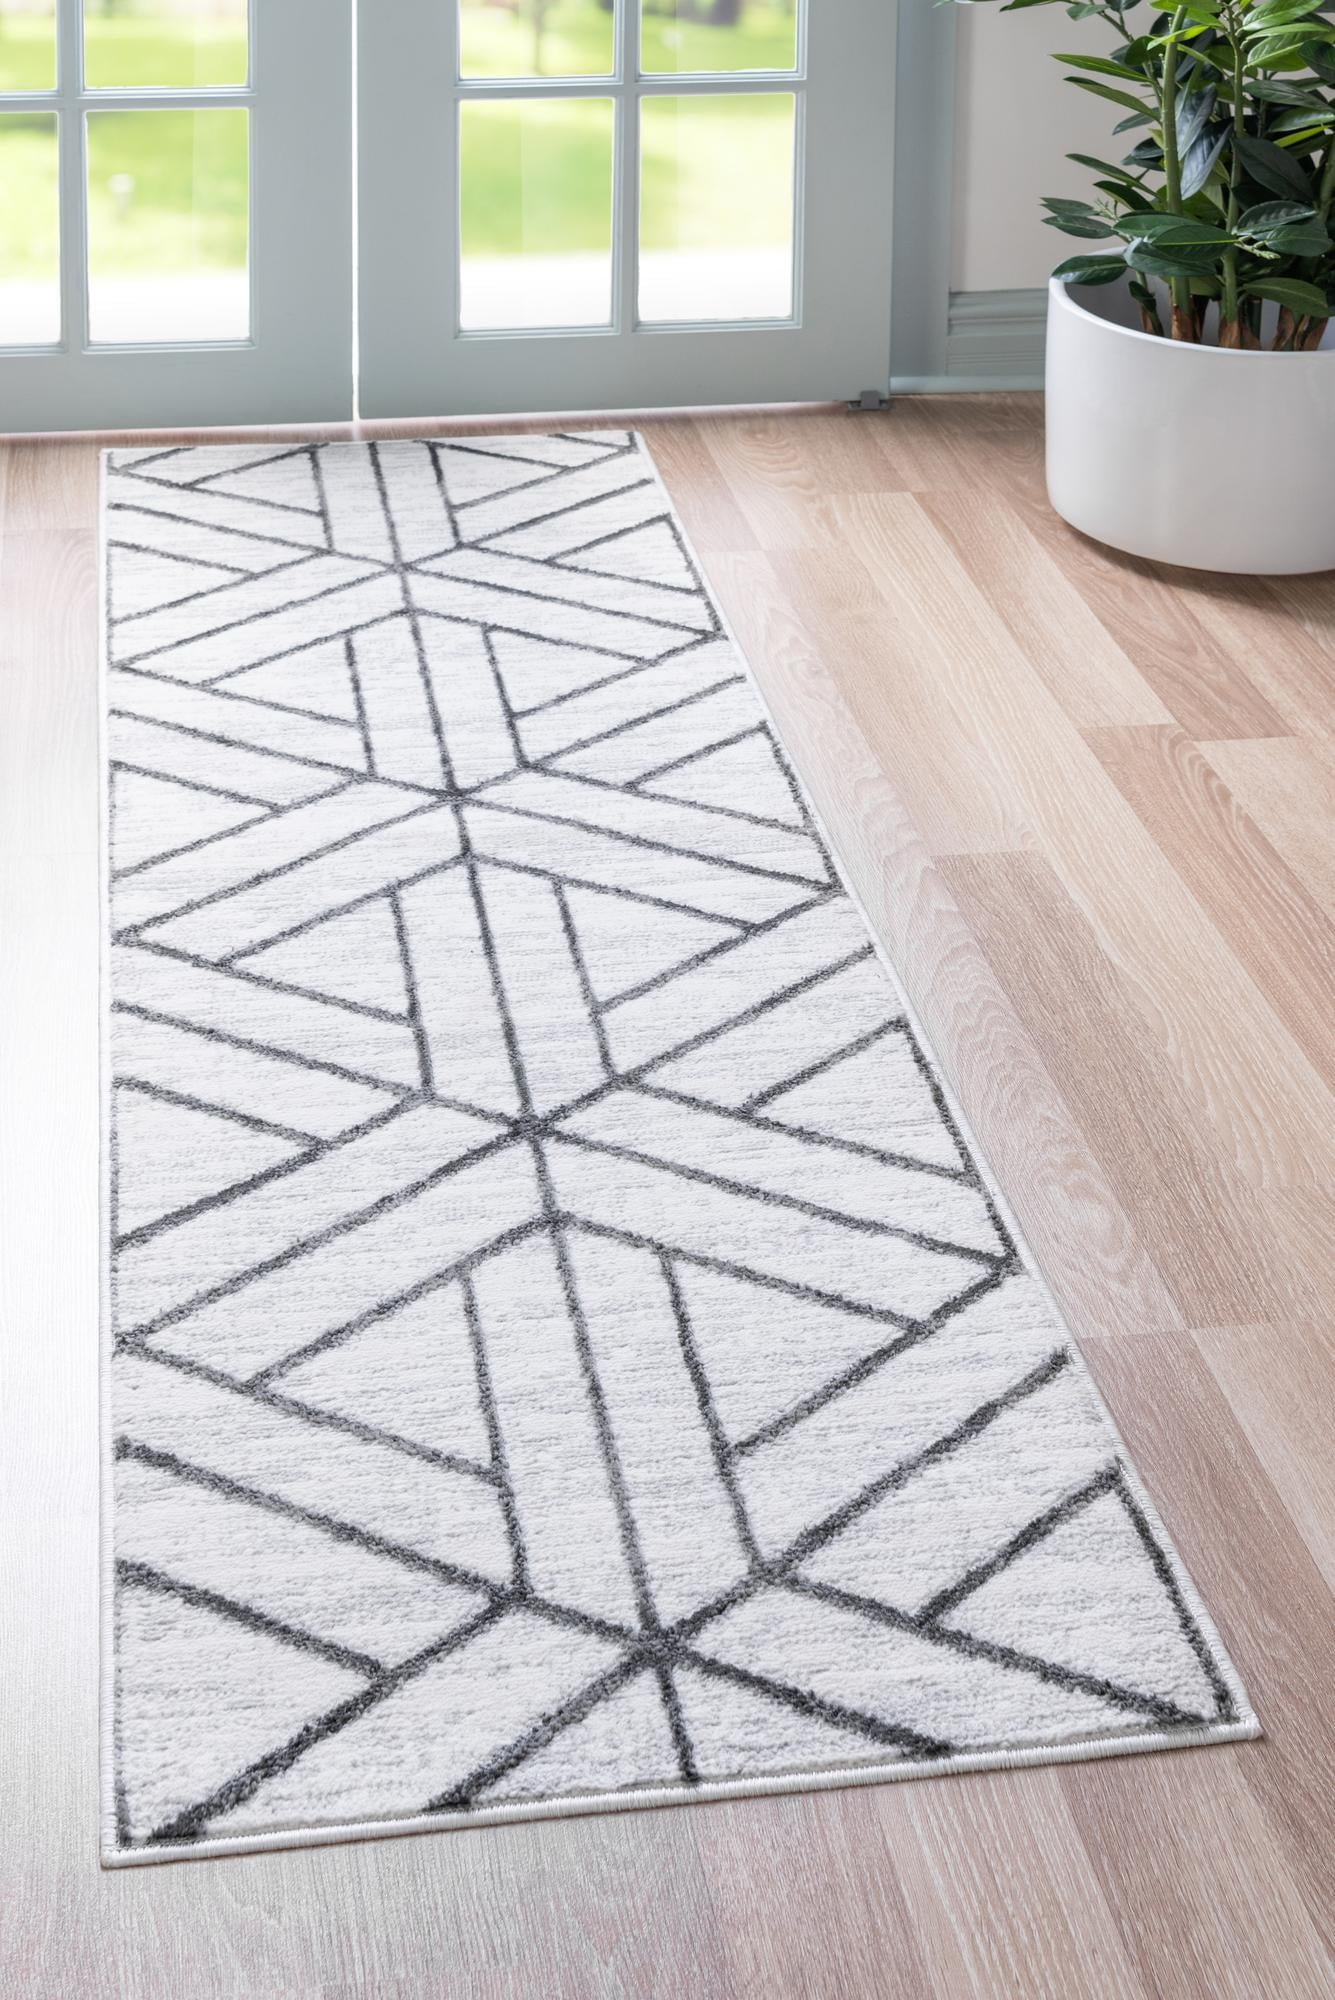 Rugs.com Lattice Trellis Collection Rug 6 Ft Runner White Low-Pile Rug Perfect for Hallways Entryways 